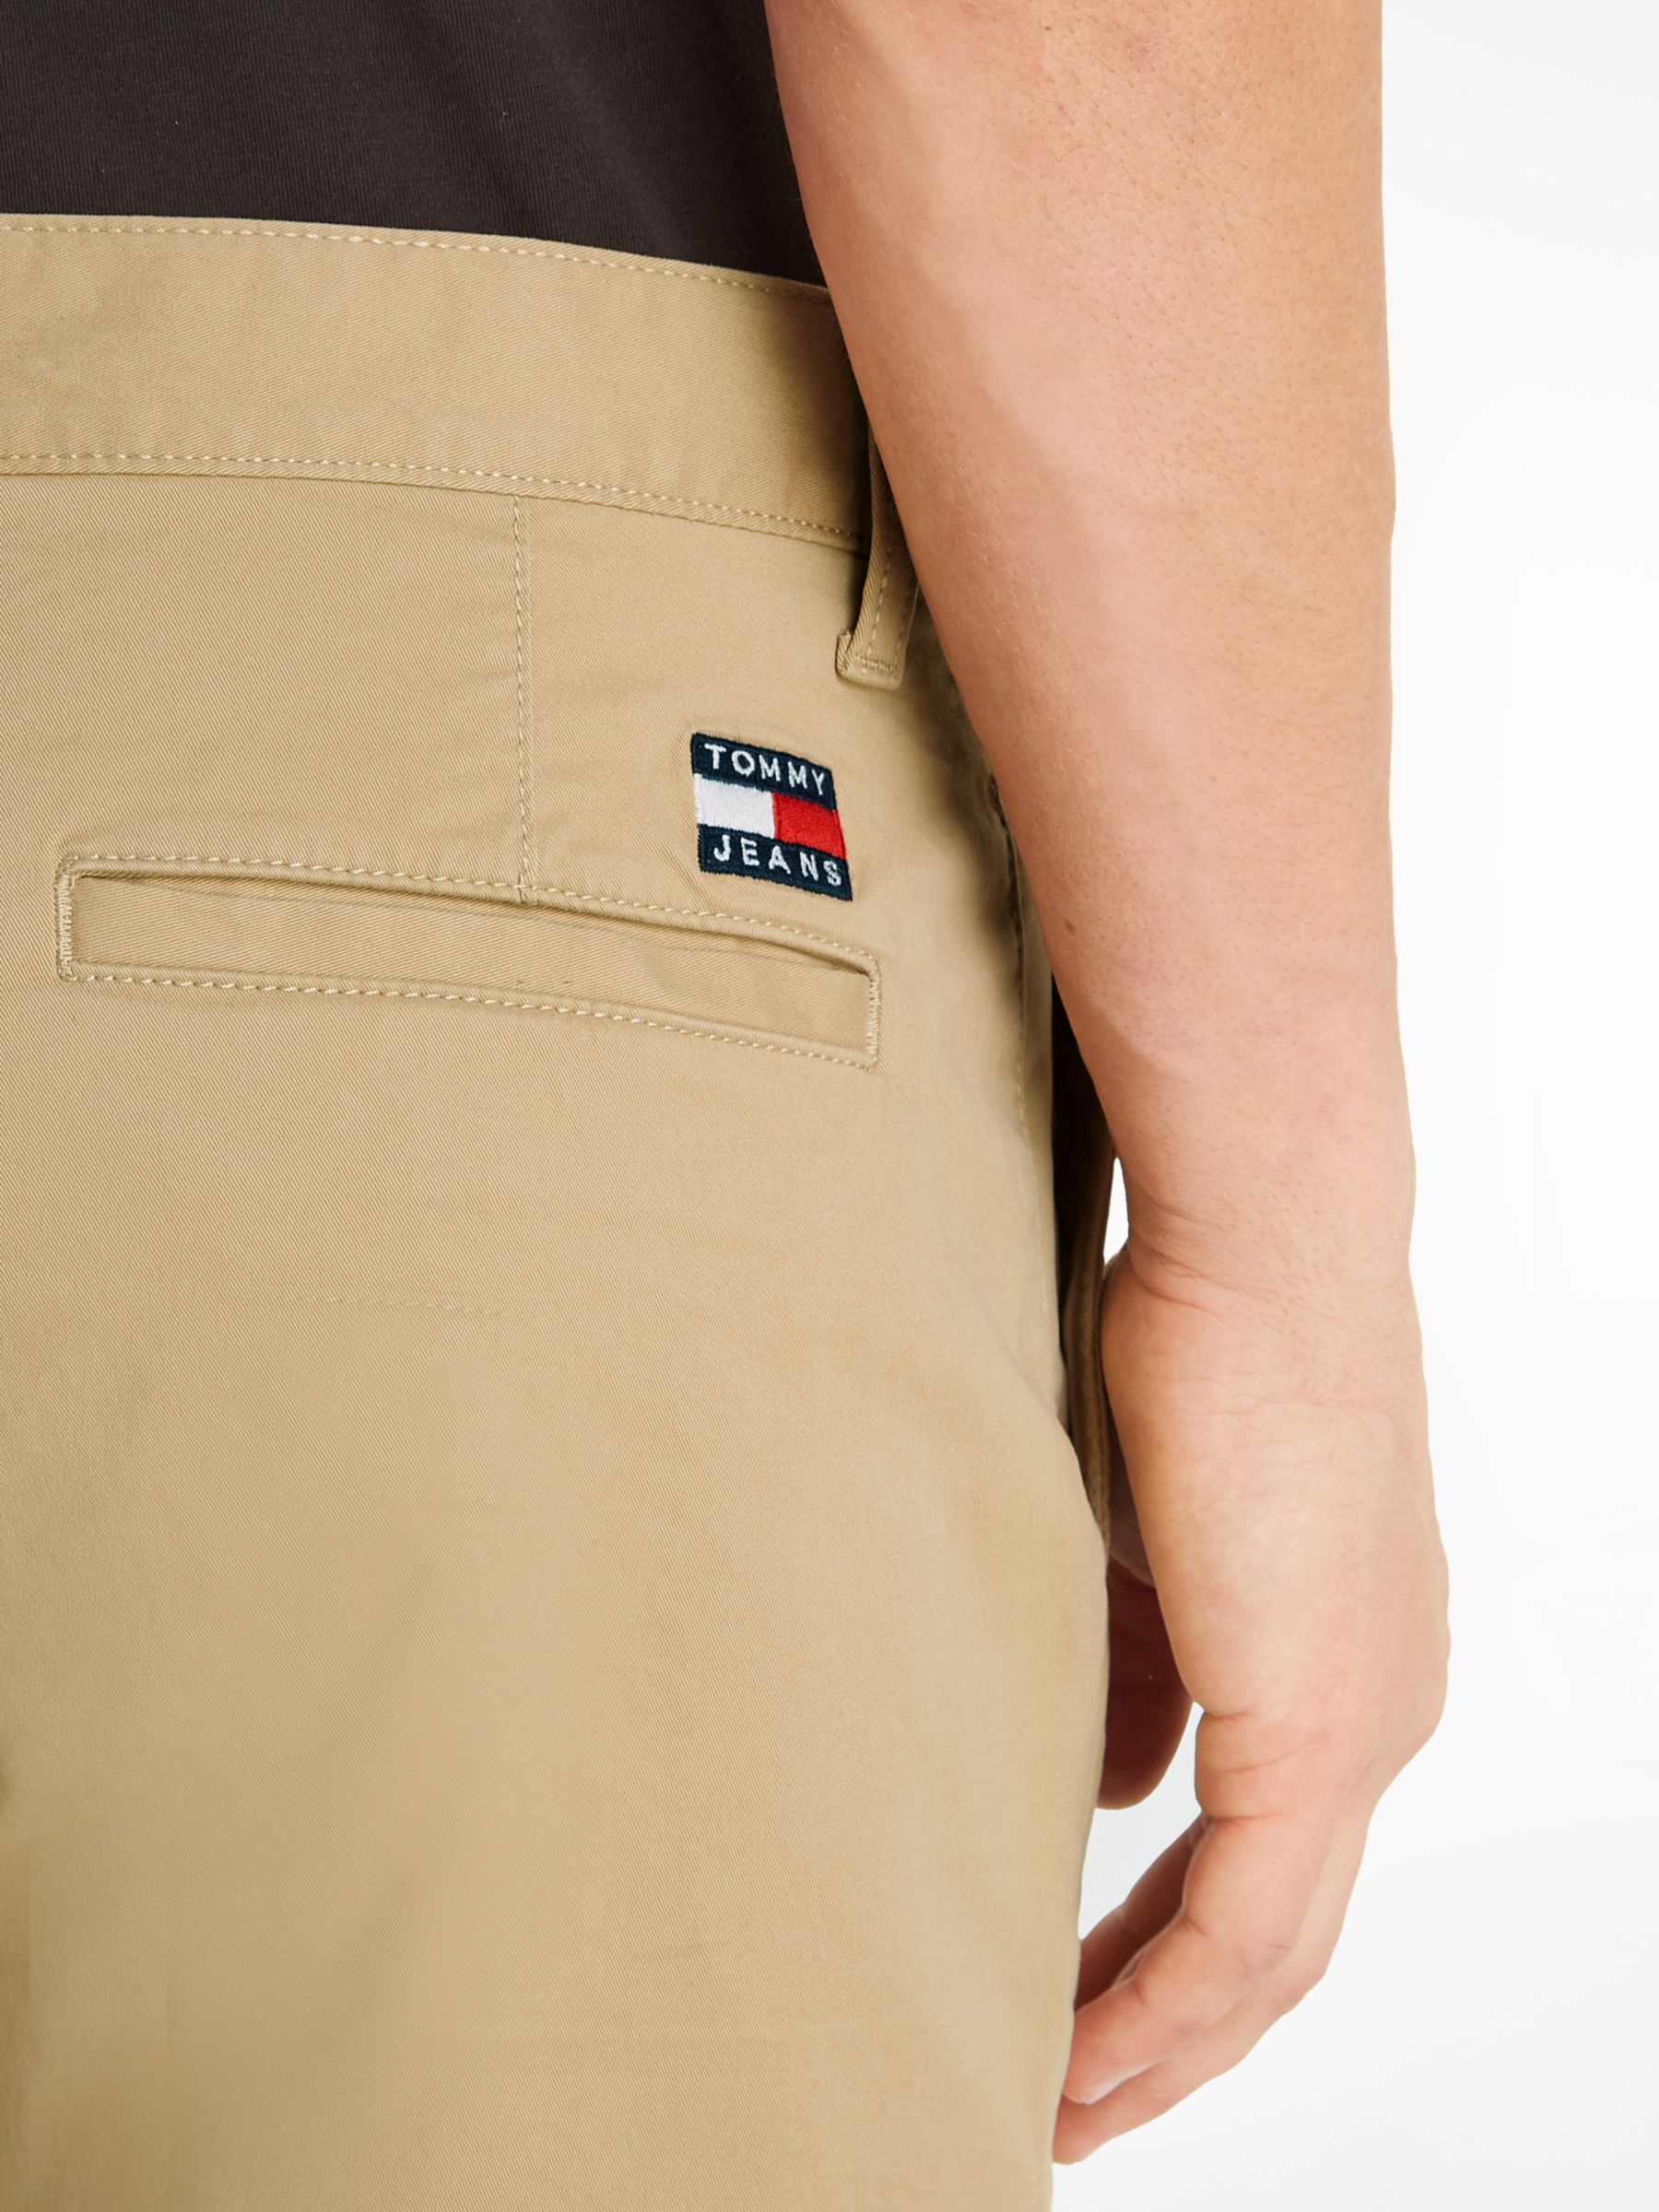 Tommy Jeans Scanton Chino Shorts, Tawny Sand, 30R